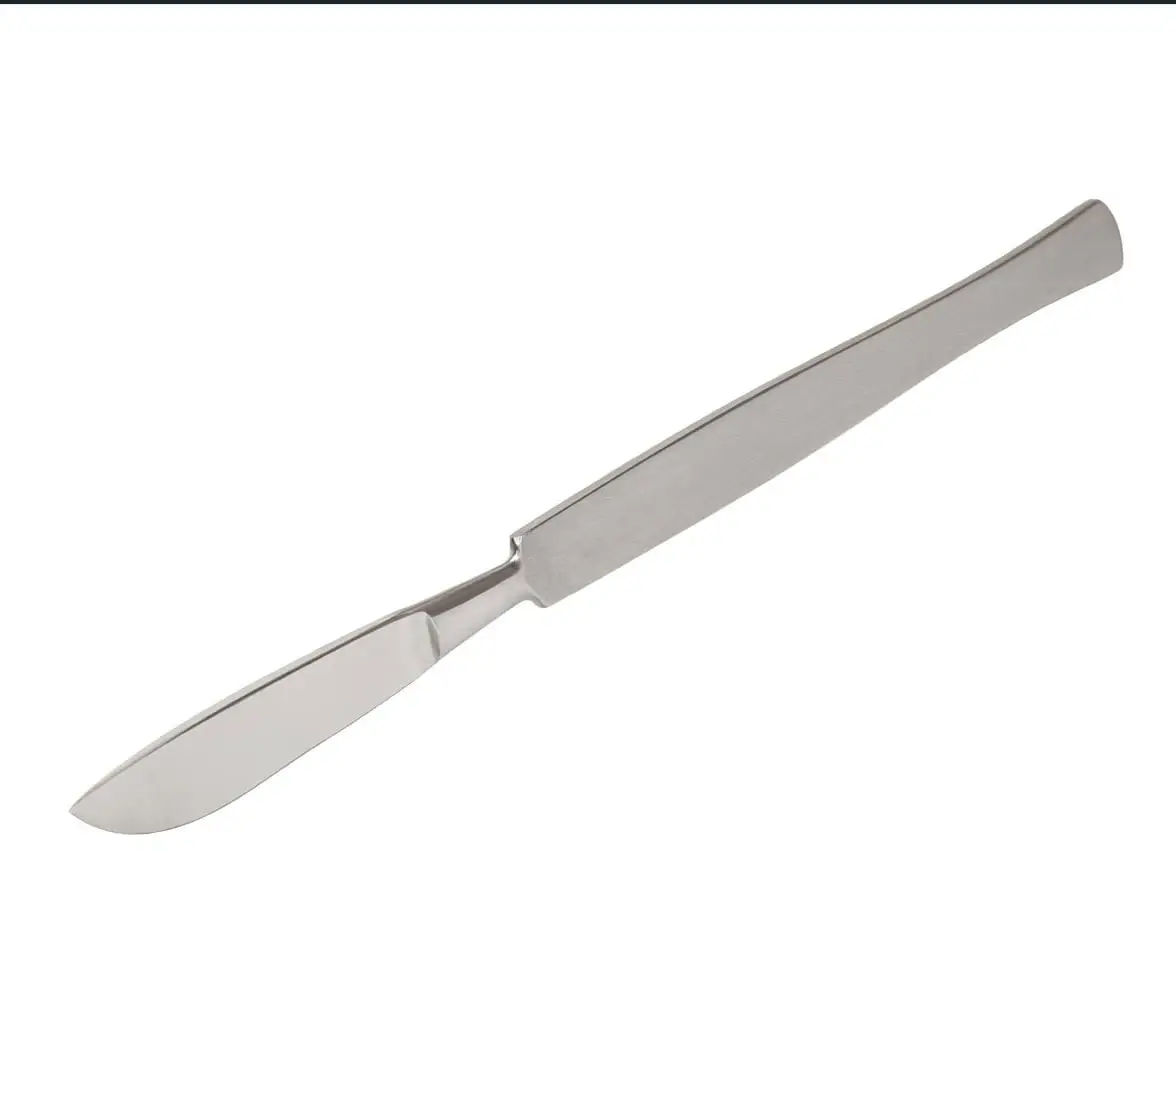 Professional scalpel with fixed sharp blade, 15 cm (blade 36 mm) - Branded instruments in clinic-quality